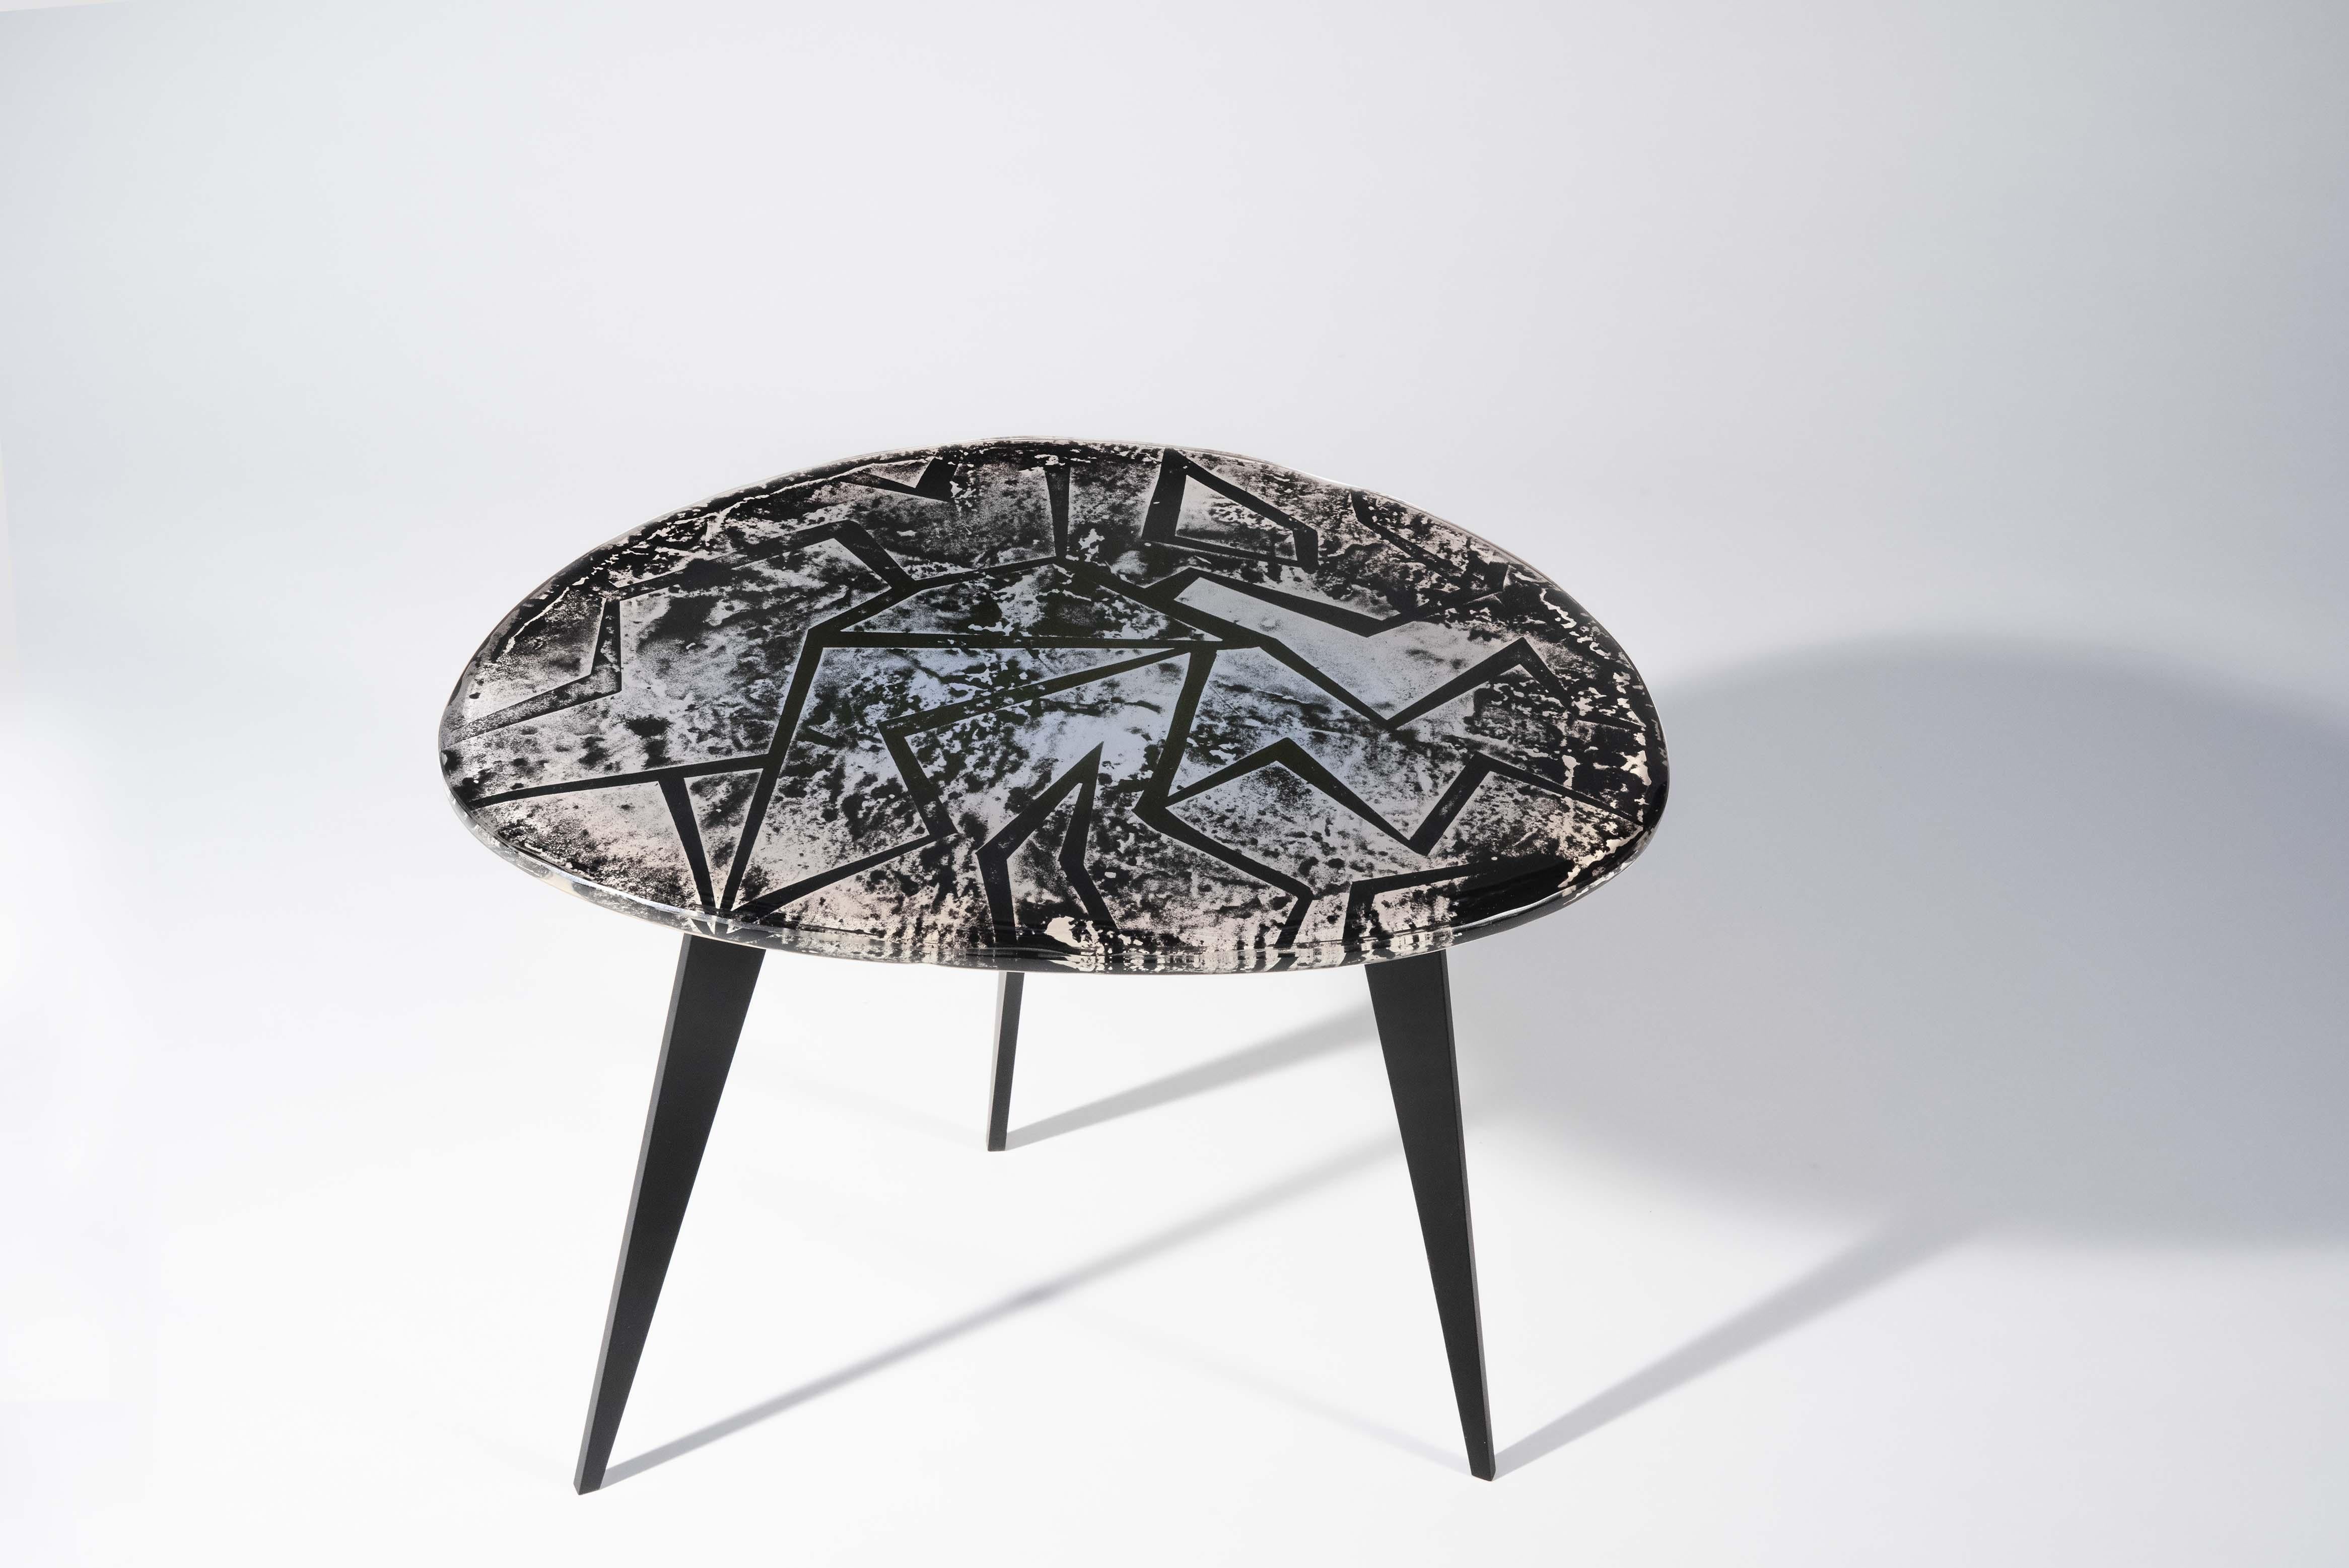 
Each coffee table is a unique piece. It is handmade with the utmost care and attention to detail. The entire support structure is made of brass with a matte black finish. The crystal top in the shape of a rounded drop is made of hand-engraved